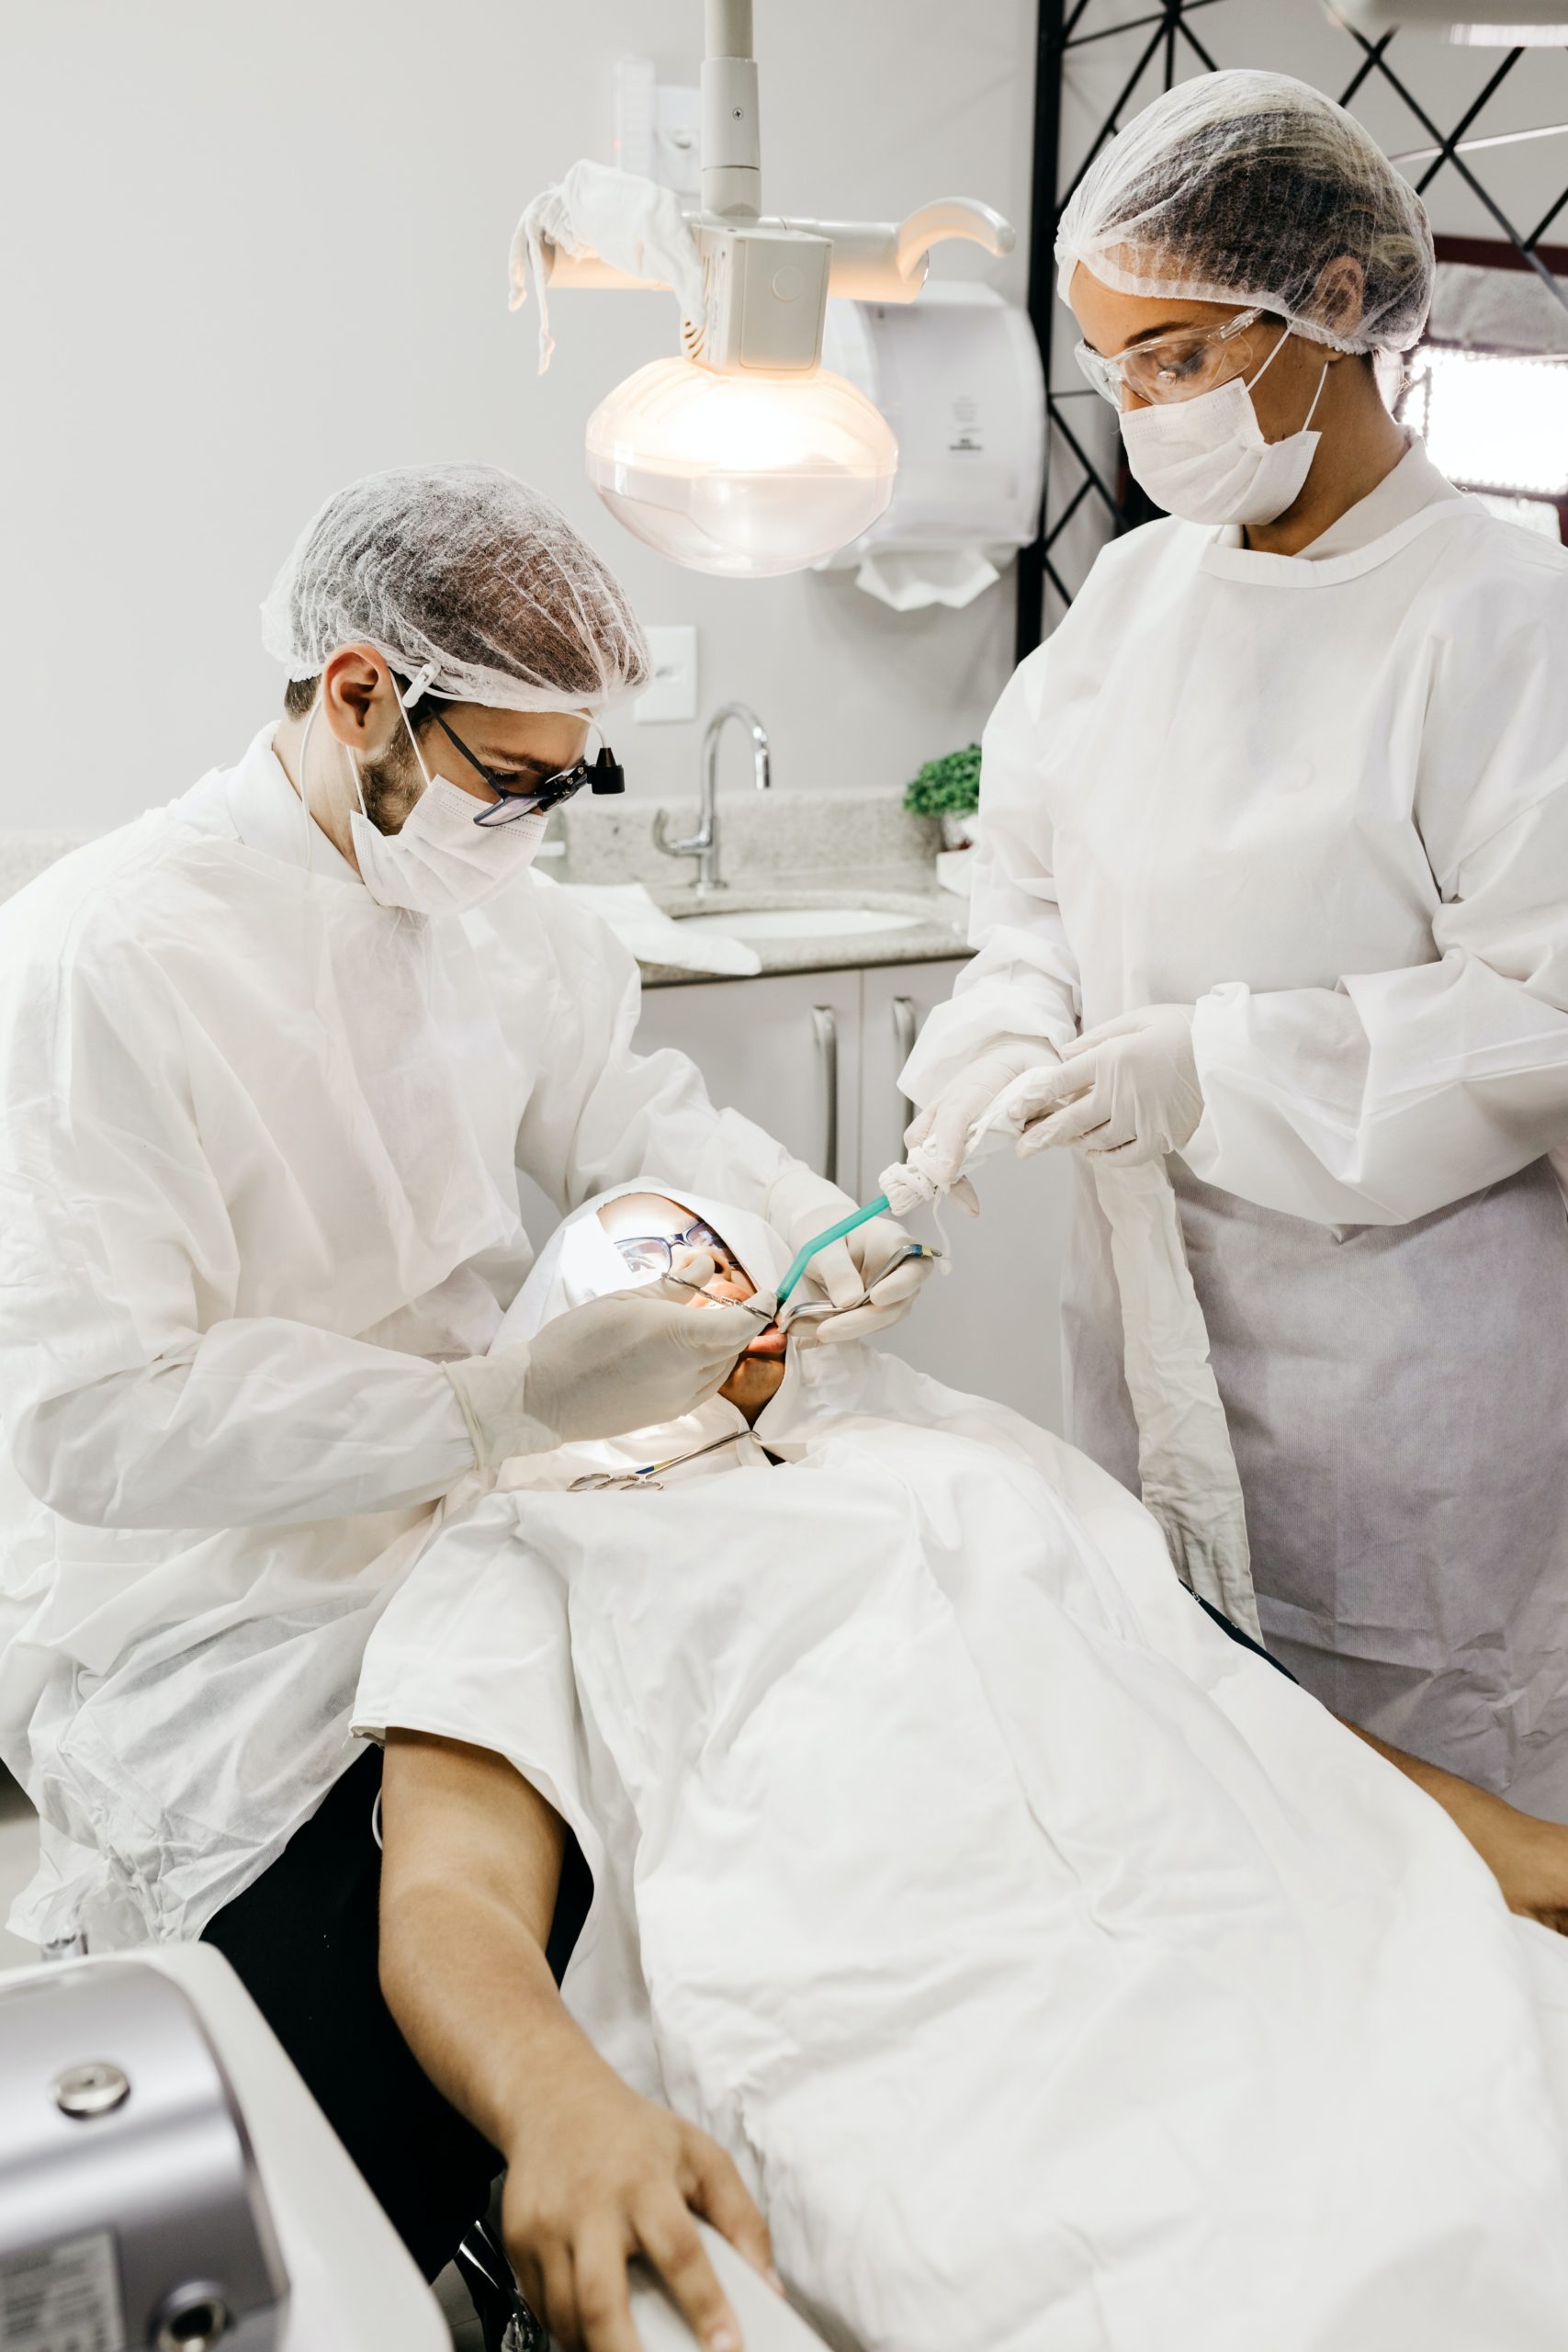 Emergency dentist carrying out surgery